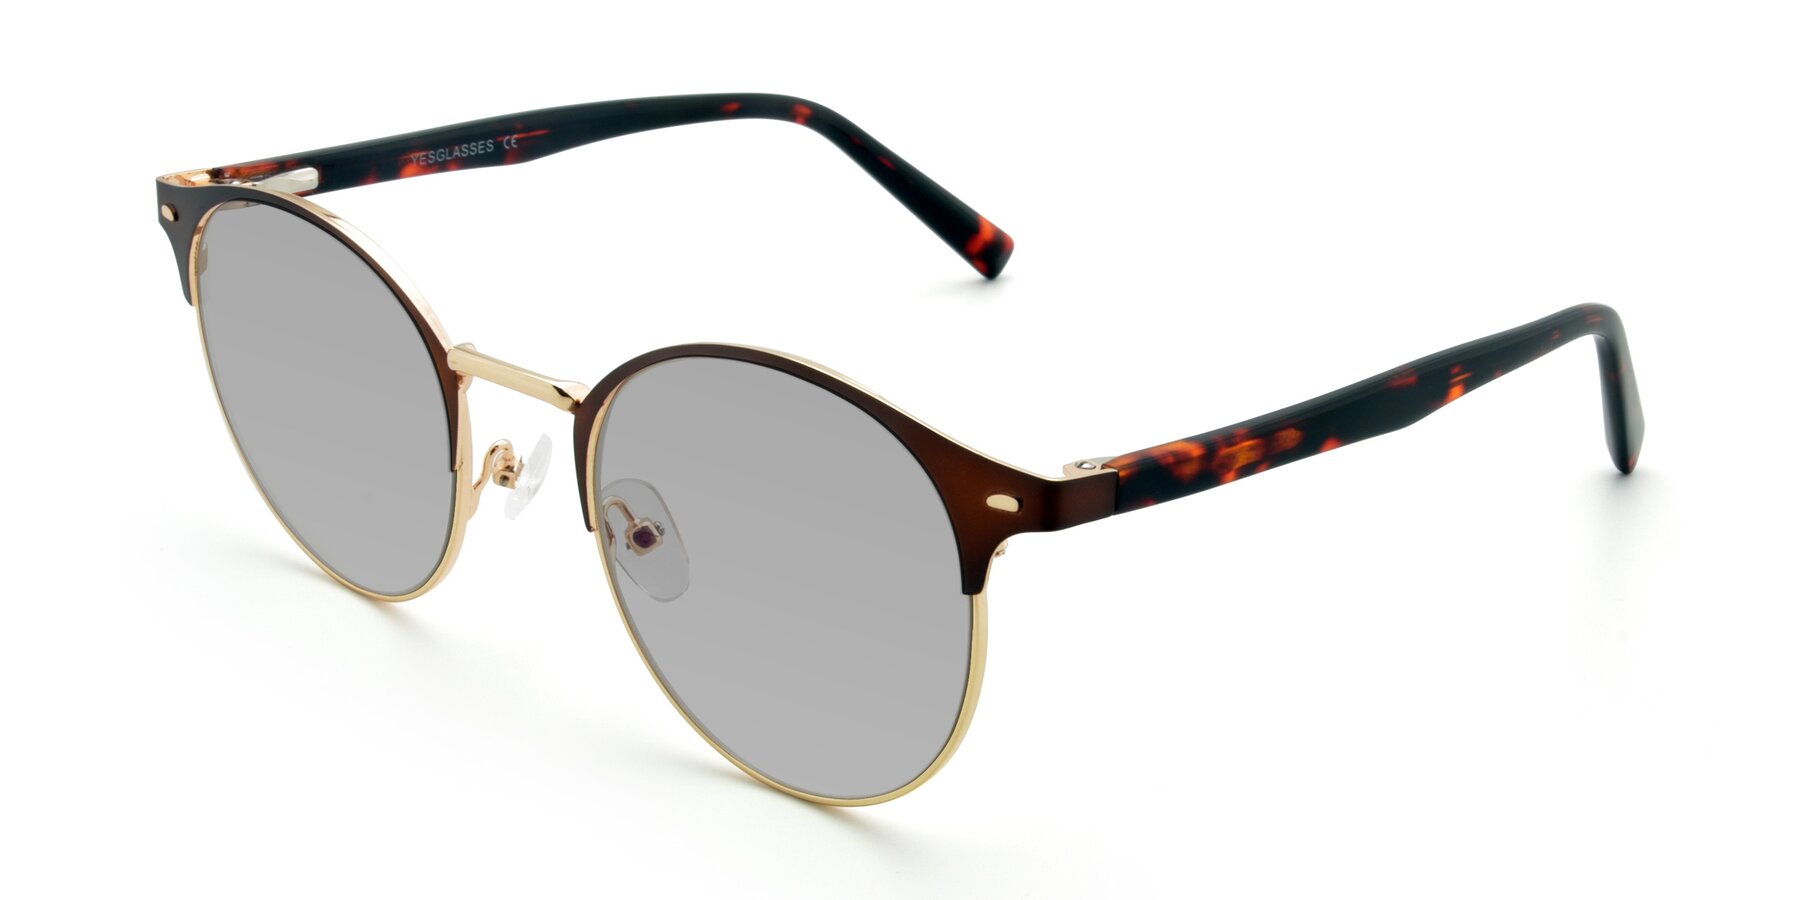 Angle of 9099 in Brown-Gold with Light Gray Tinted Lenses